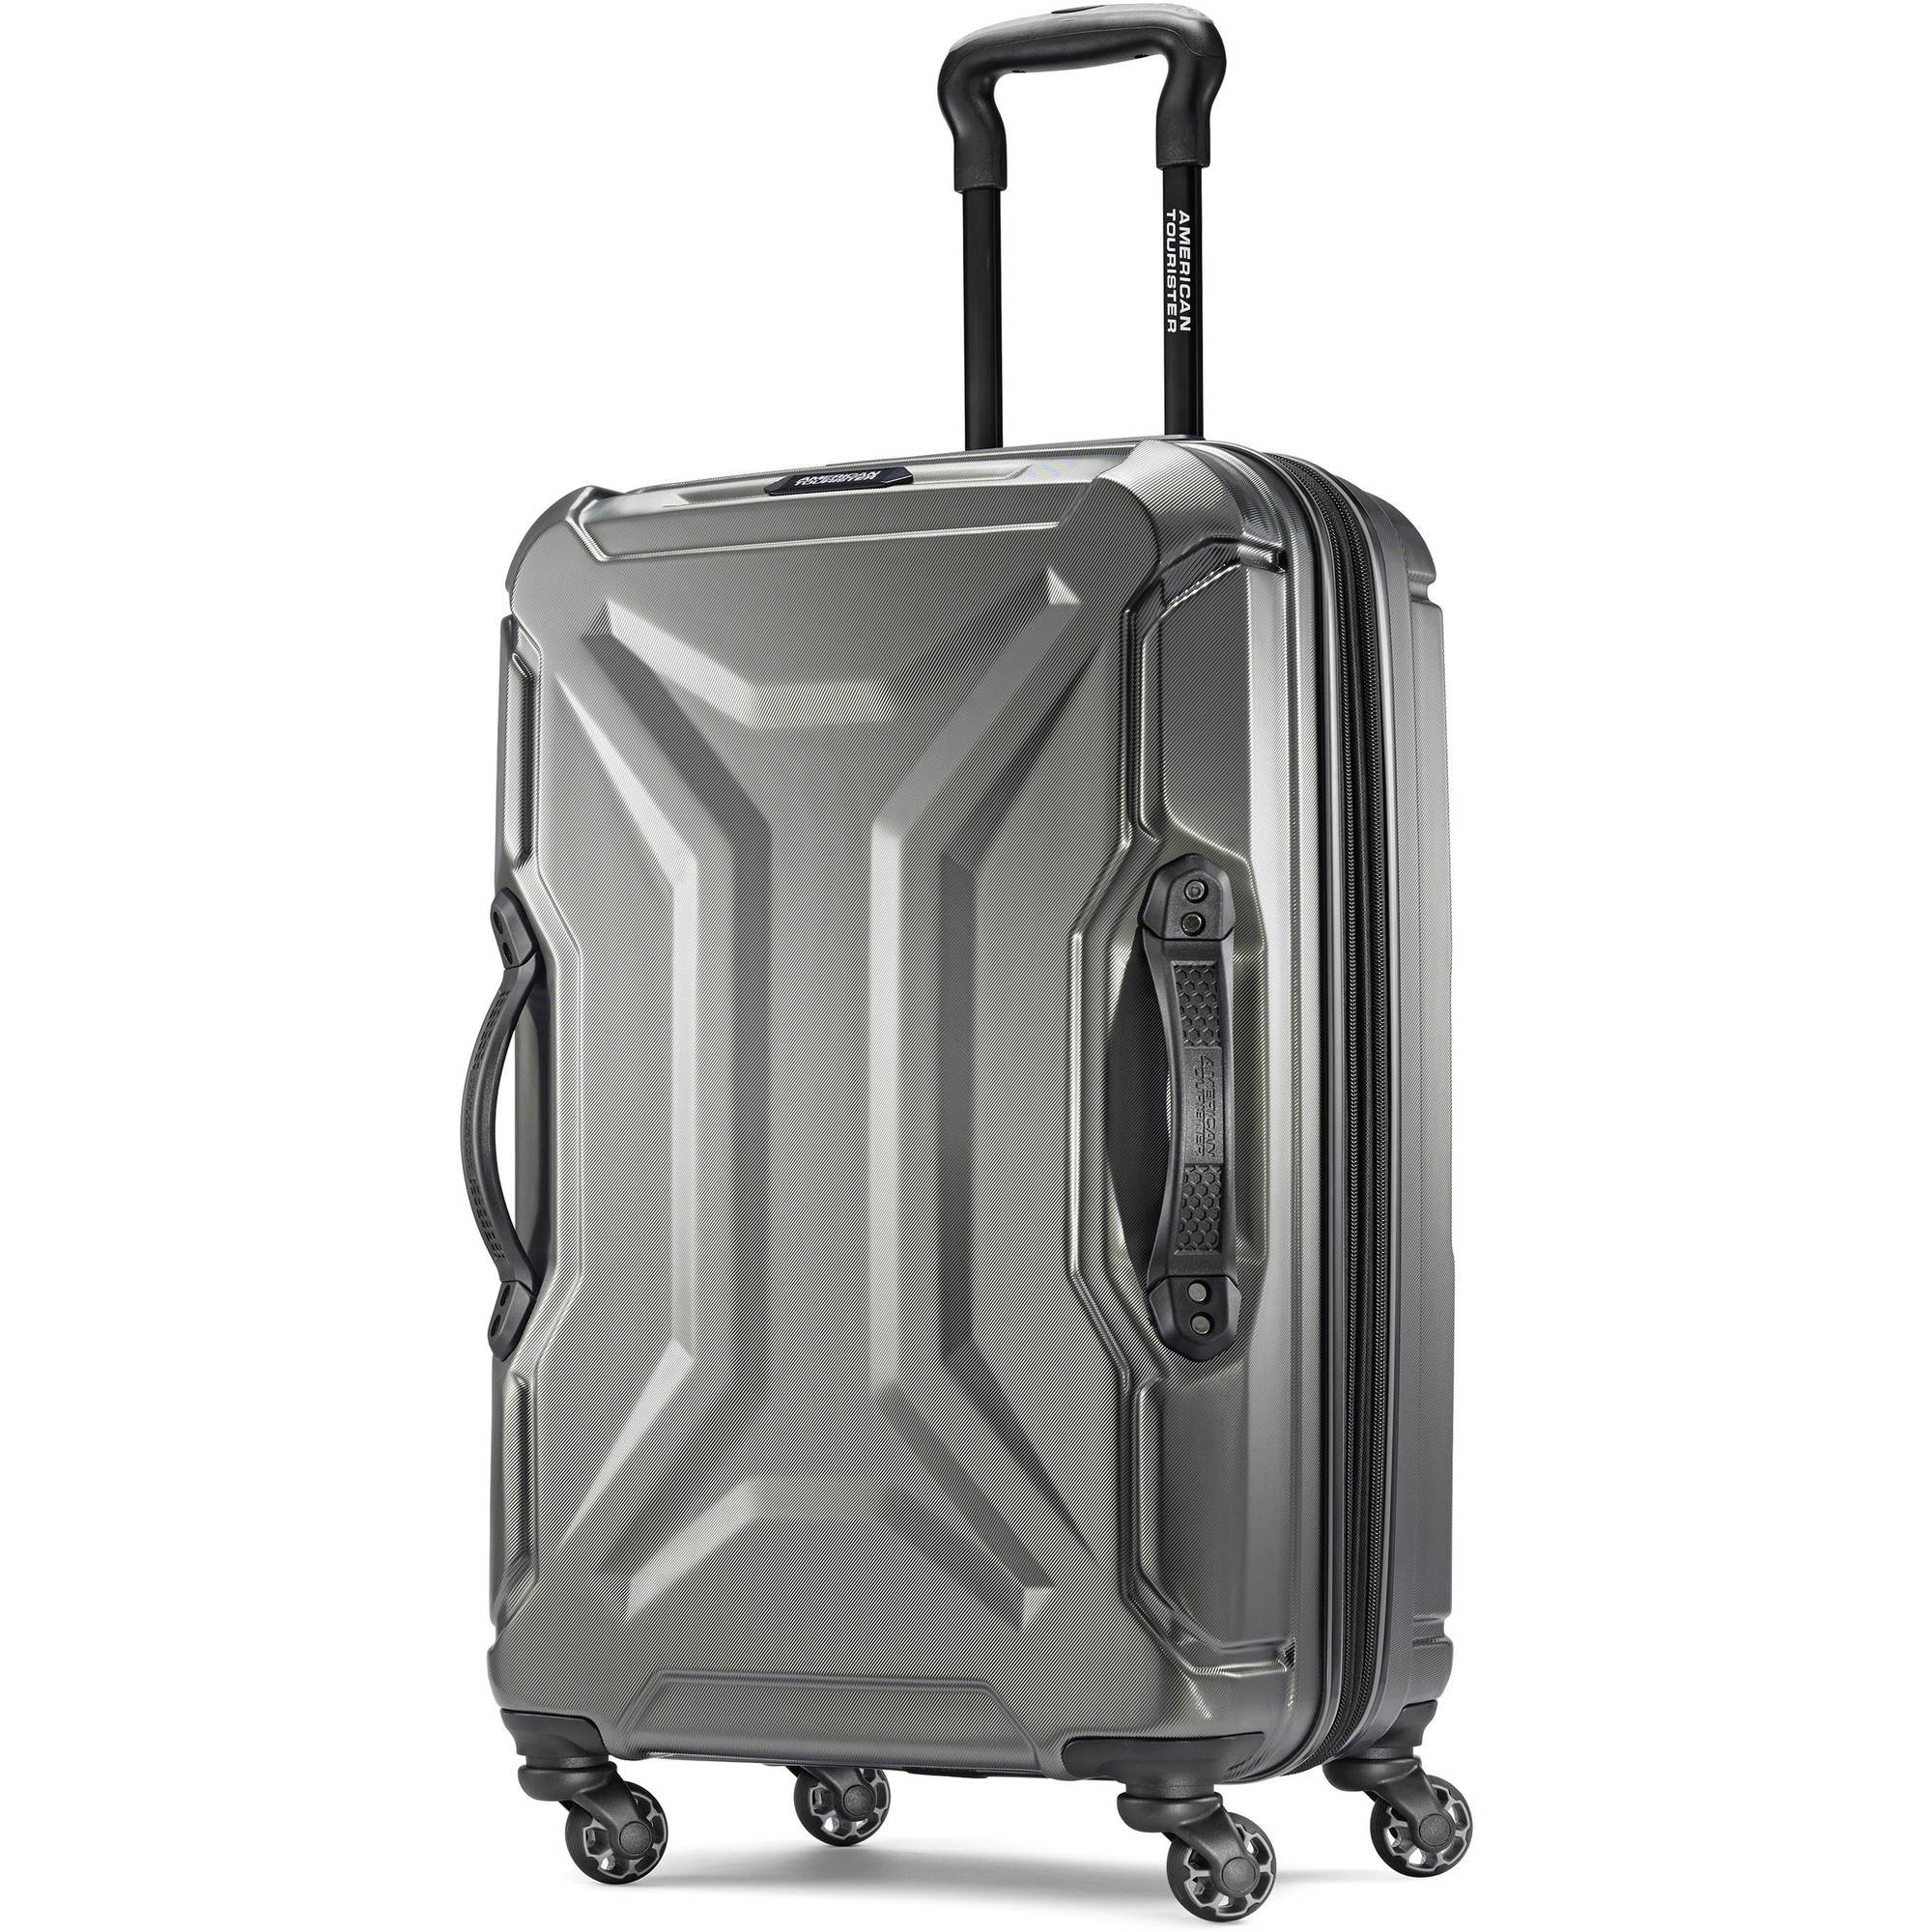 American Tourister Cargo Max 25″ Hardside Spinner Luggage